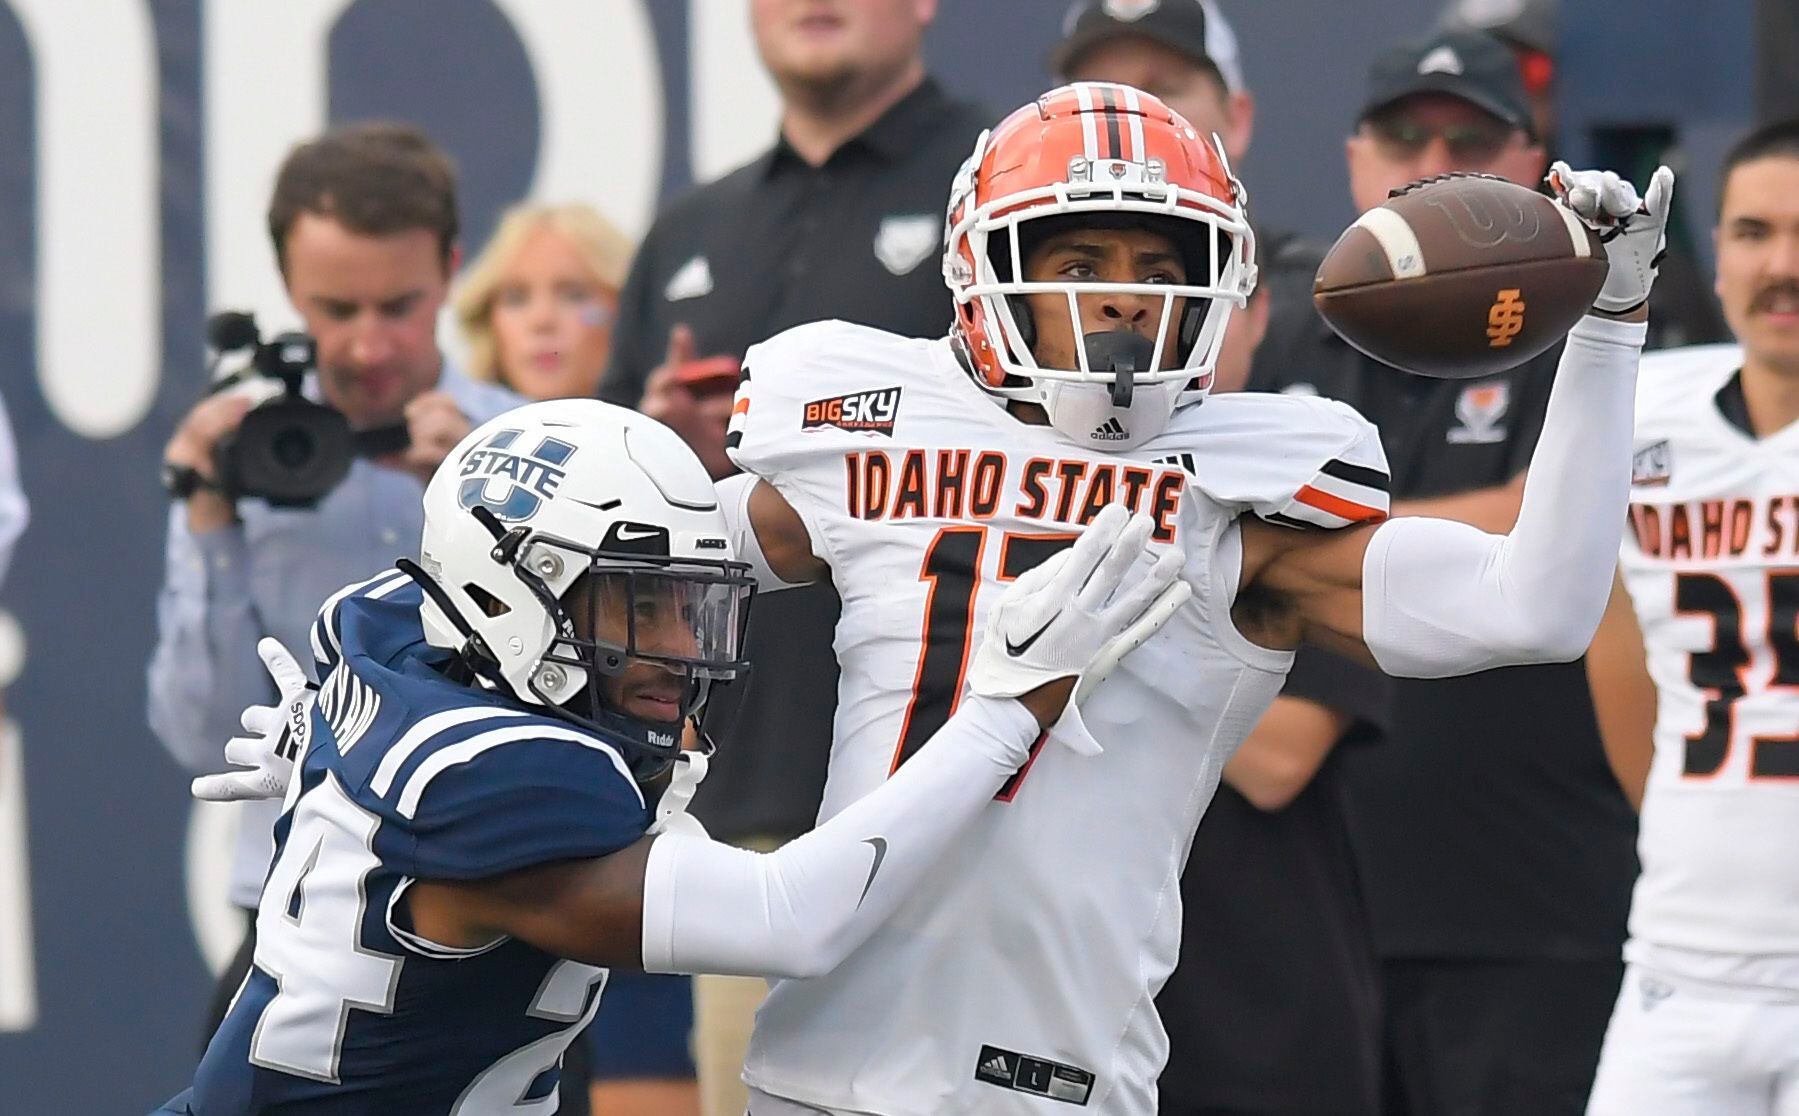 Utah State cornerback Gabriel Bryan, left, breaks up a pass intended for Idaho State wide receiver Cyrus Wallace during the first half of an NCAA college football game Saturday, Sept. 9, 2023, in Logan, Utah. (Eli Lucero/The Herald Journal via AP)